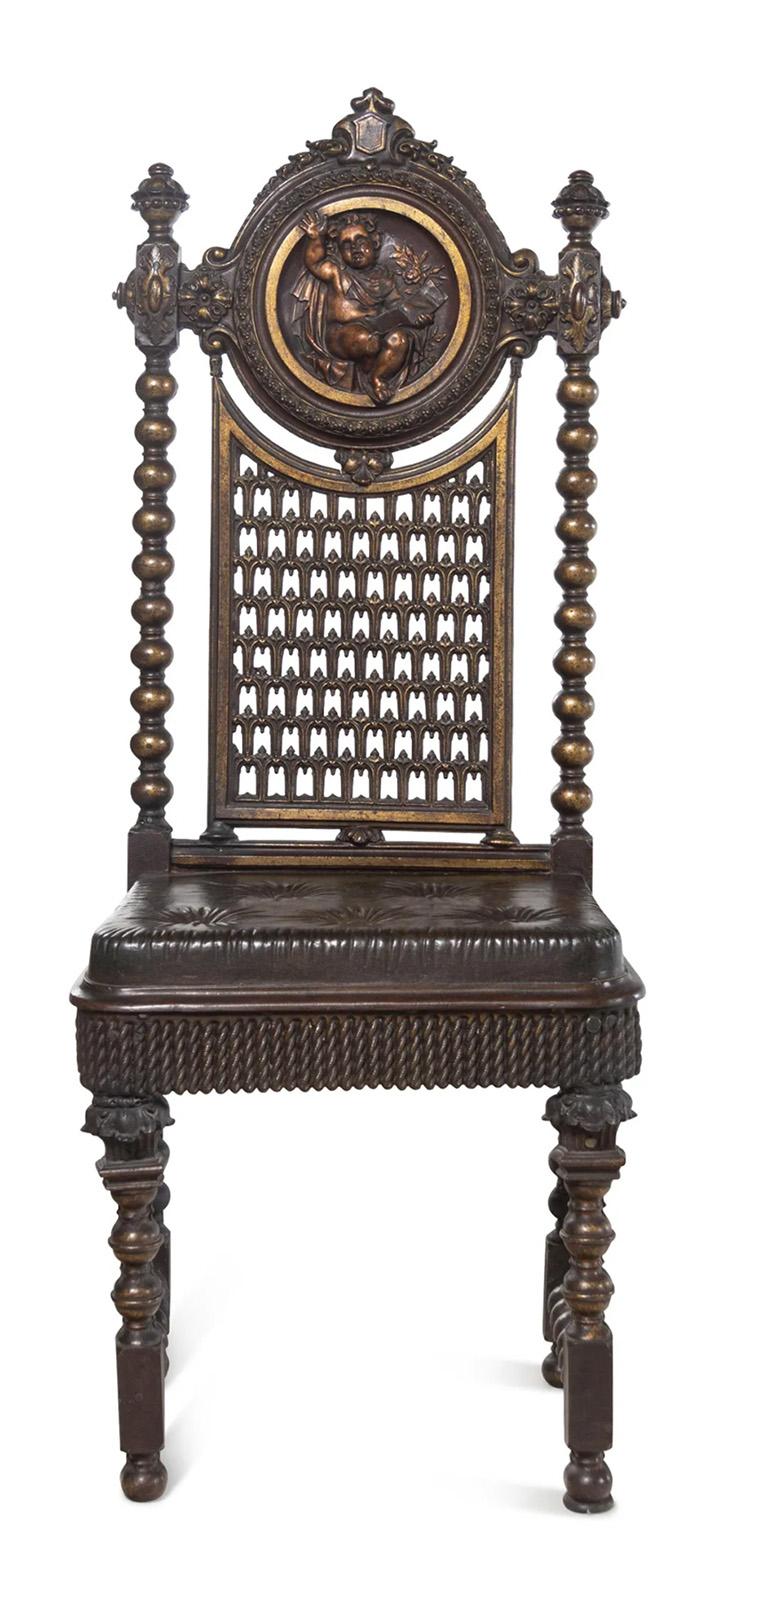 A 19th century Renaissance Revival bronzed metal chair after the style of Christopher Dresser. 

Dimensions: 49.75